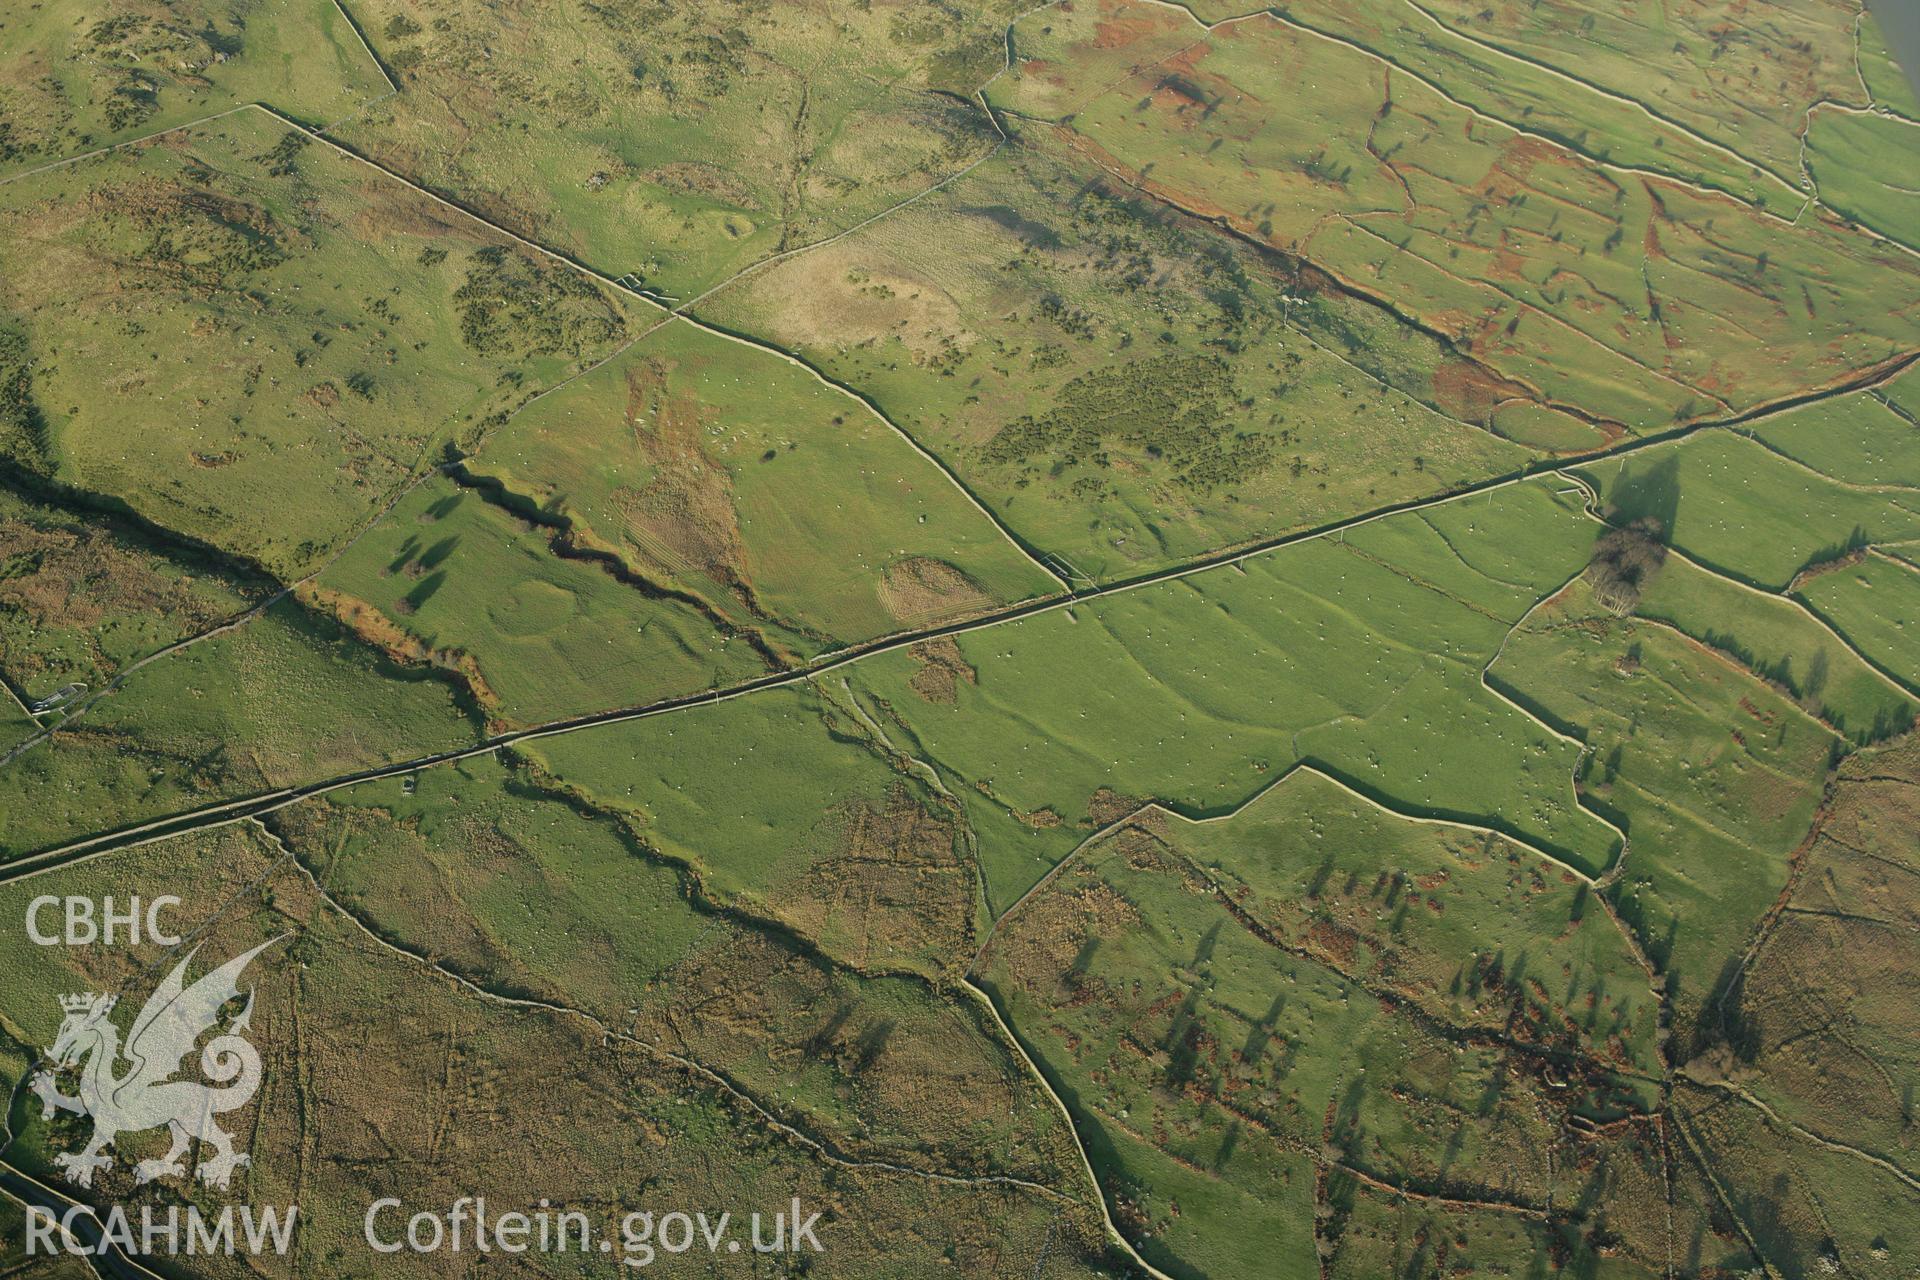 RCAHMW colour oblique aerial photograph of a homestead near Maen-y-Bardd. Taken on 10 December 2009 by Toby Driver